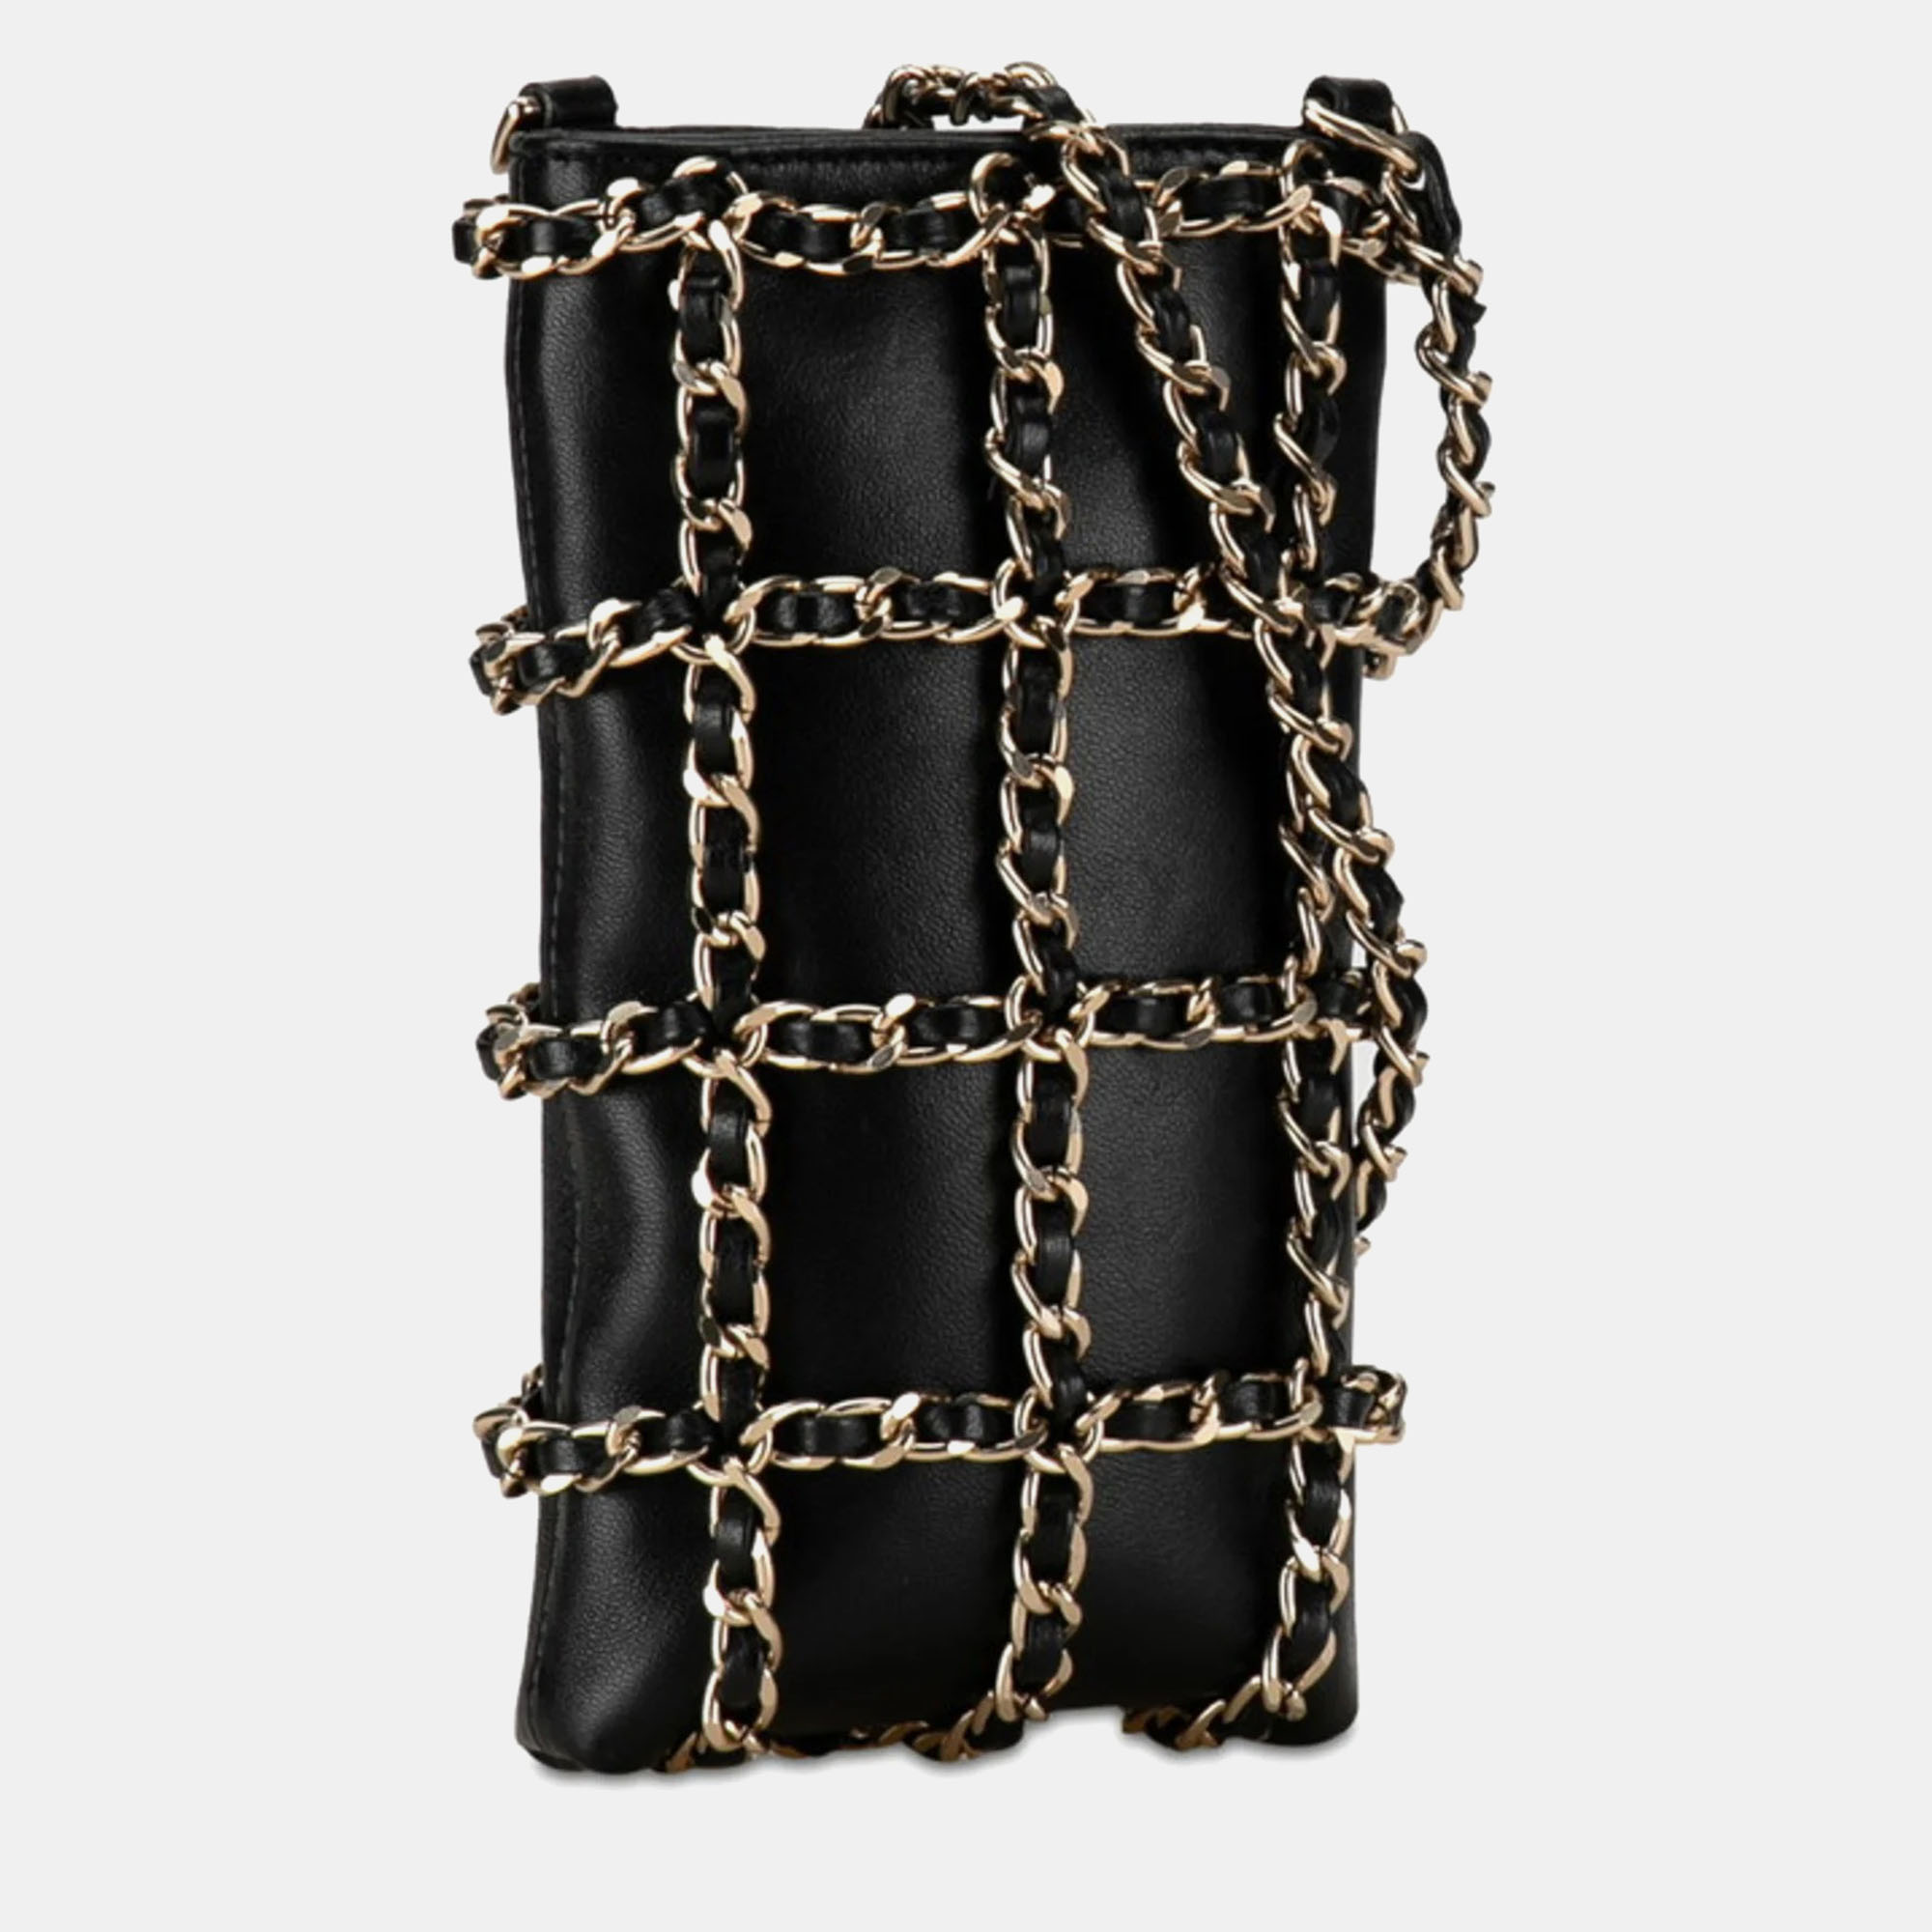 Chanel black leather tech me out phone crossbody bag